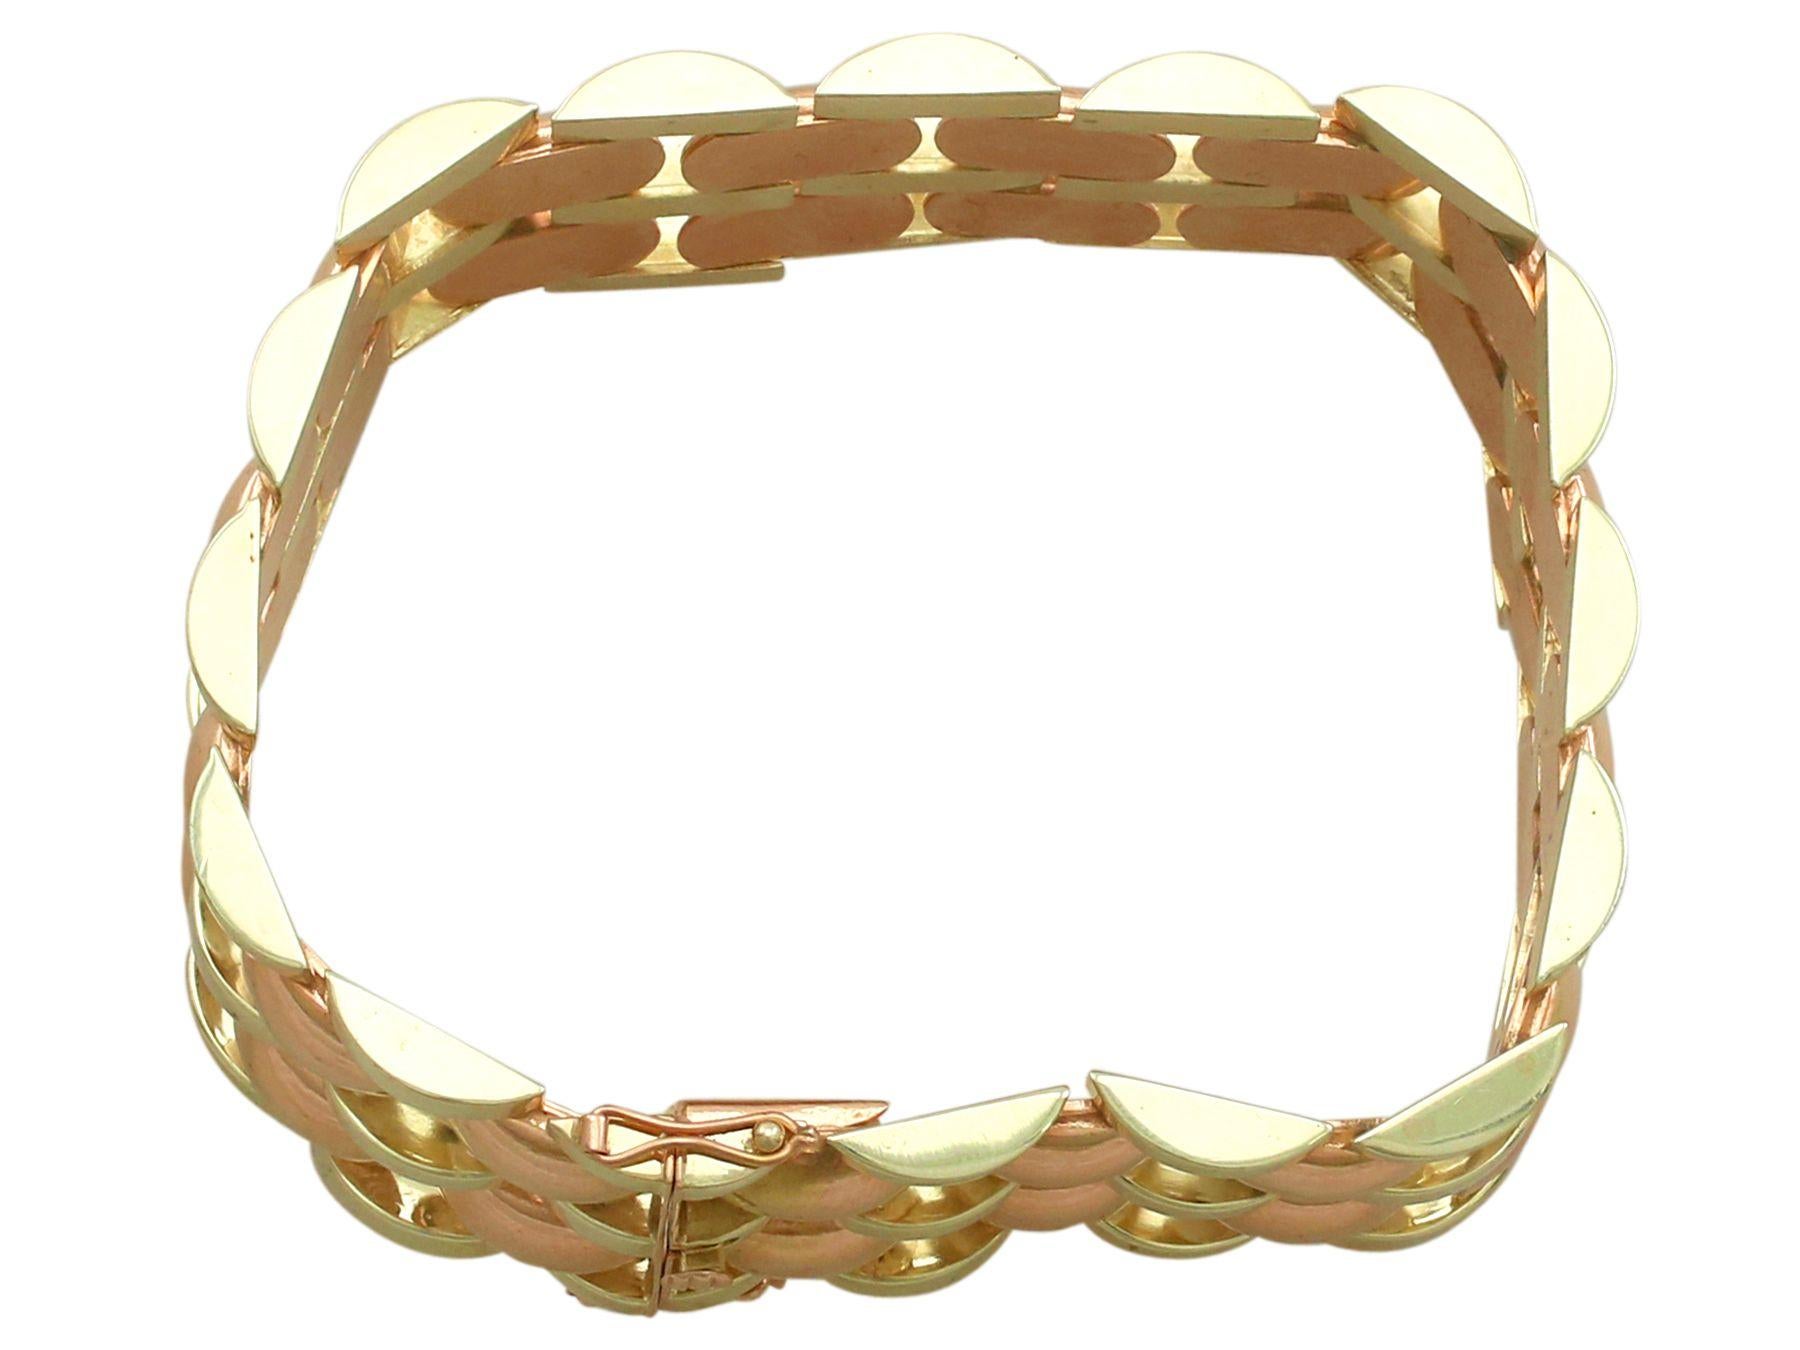 A stunning vintage Art Deco style 14 karat rose gold and 14 karat yellow gold bracelet; part of diverse Art Deco jewelry and estate jewelry collections. 

This stunning, fine and impressive Art Deco style rose and yellow gold bracelet has been